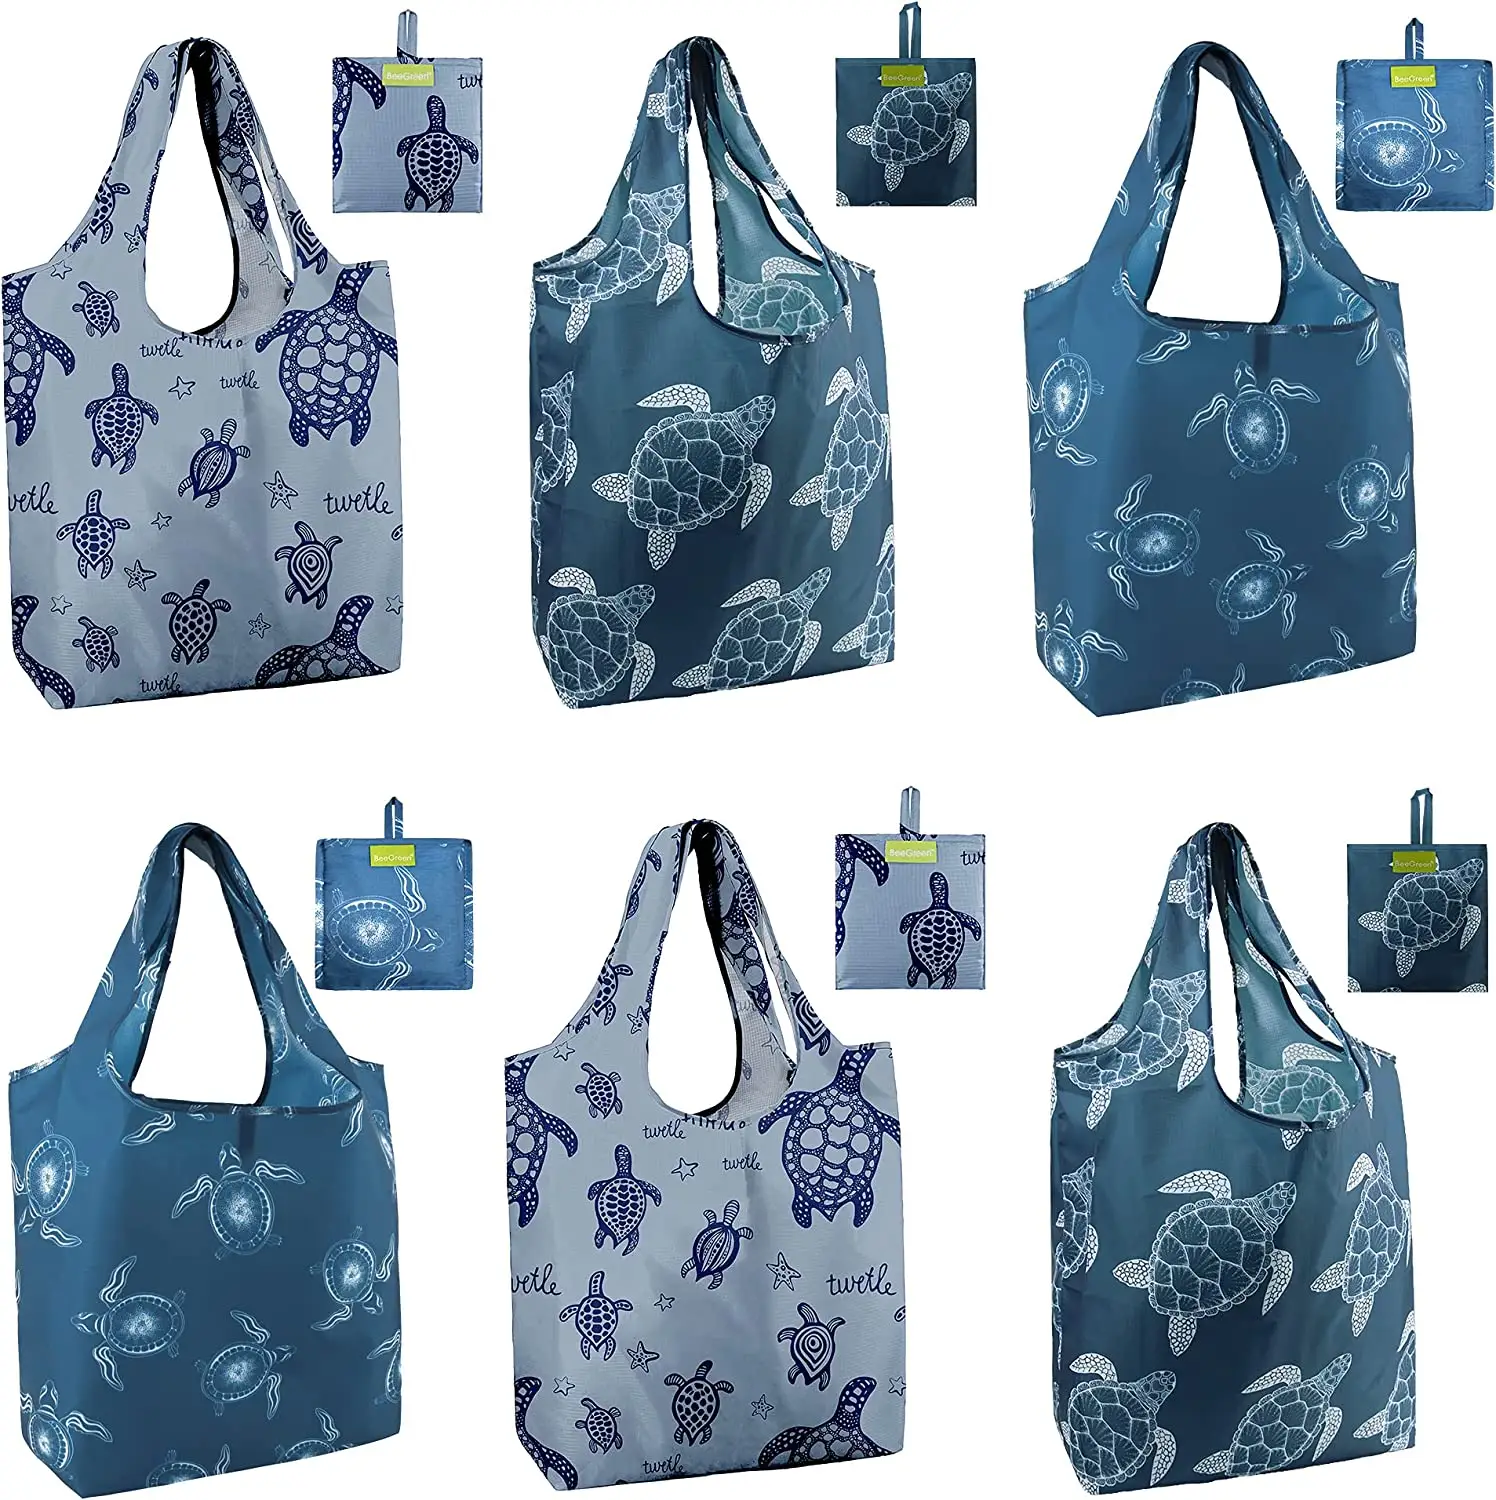 Reusable Grocery Shopping Bags Cute Tote Bags Handles Shopping Bags with Small Pouch Large 50LBS Nylon Cloth Fabric Washable